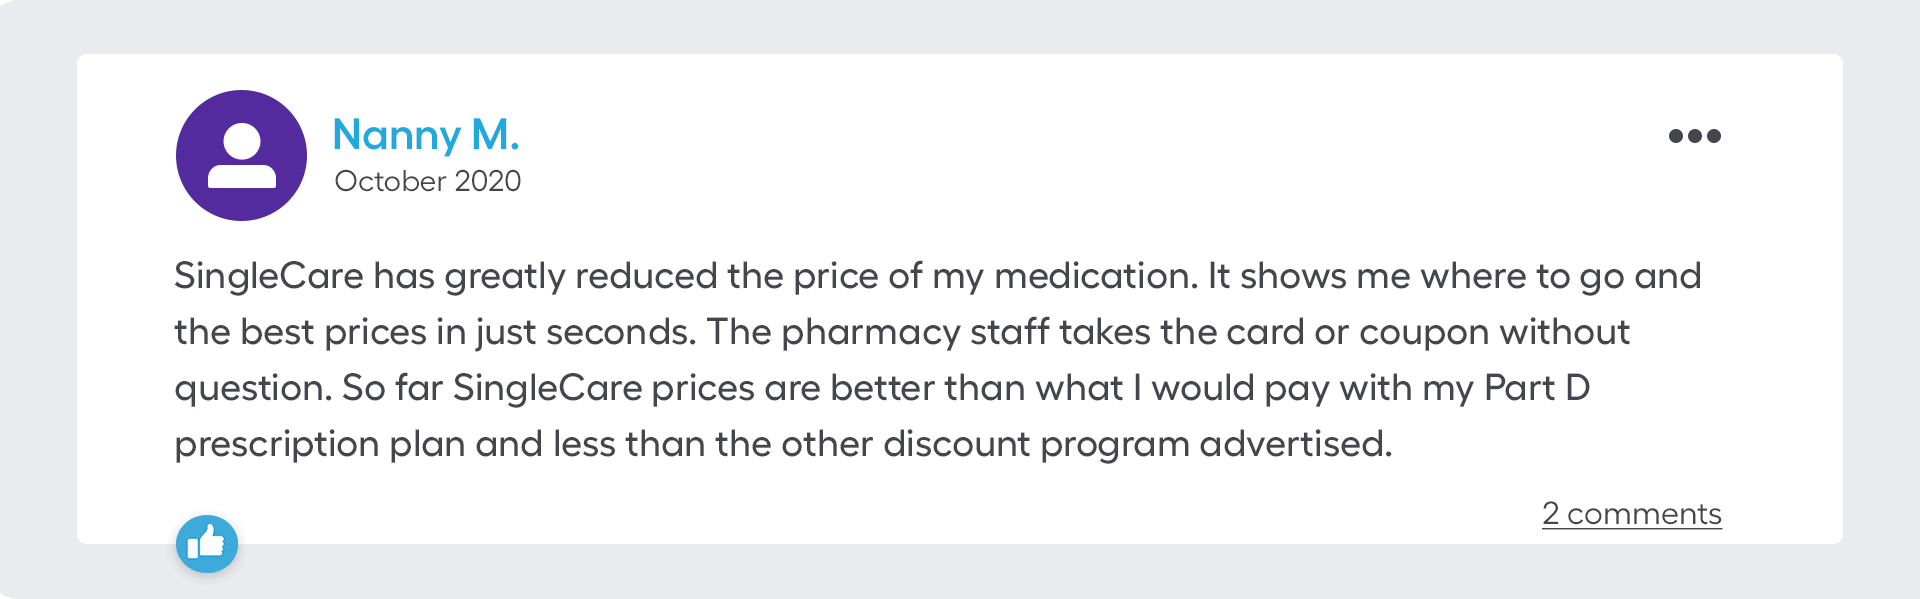 SingleCare has greatly reduced the price of my medication. It shows me where to go and the best prices in just seconds. The pharmacy staff takes the card or coupon without question. So far SingleCare prices are better than what I would pay with my Part D prescription plan and less than the other discount program advertised.